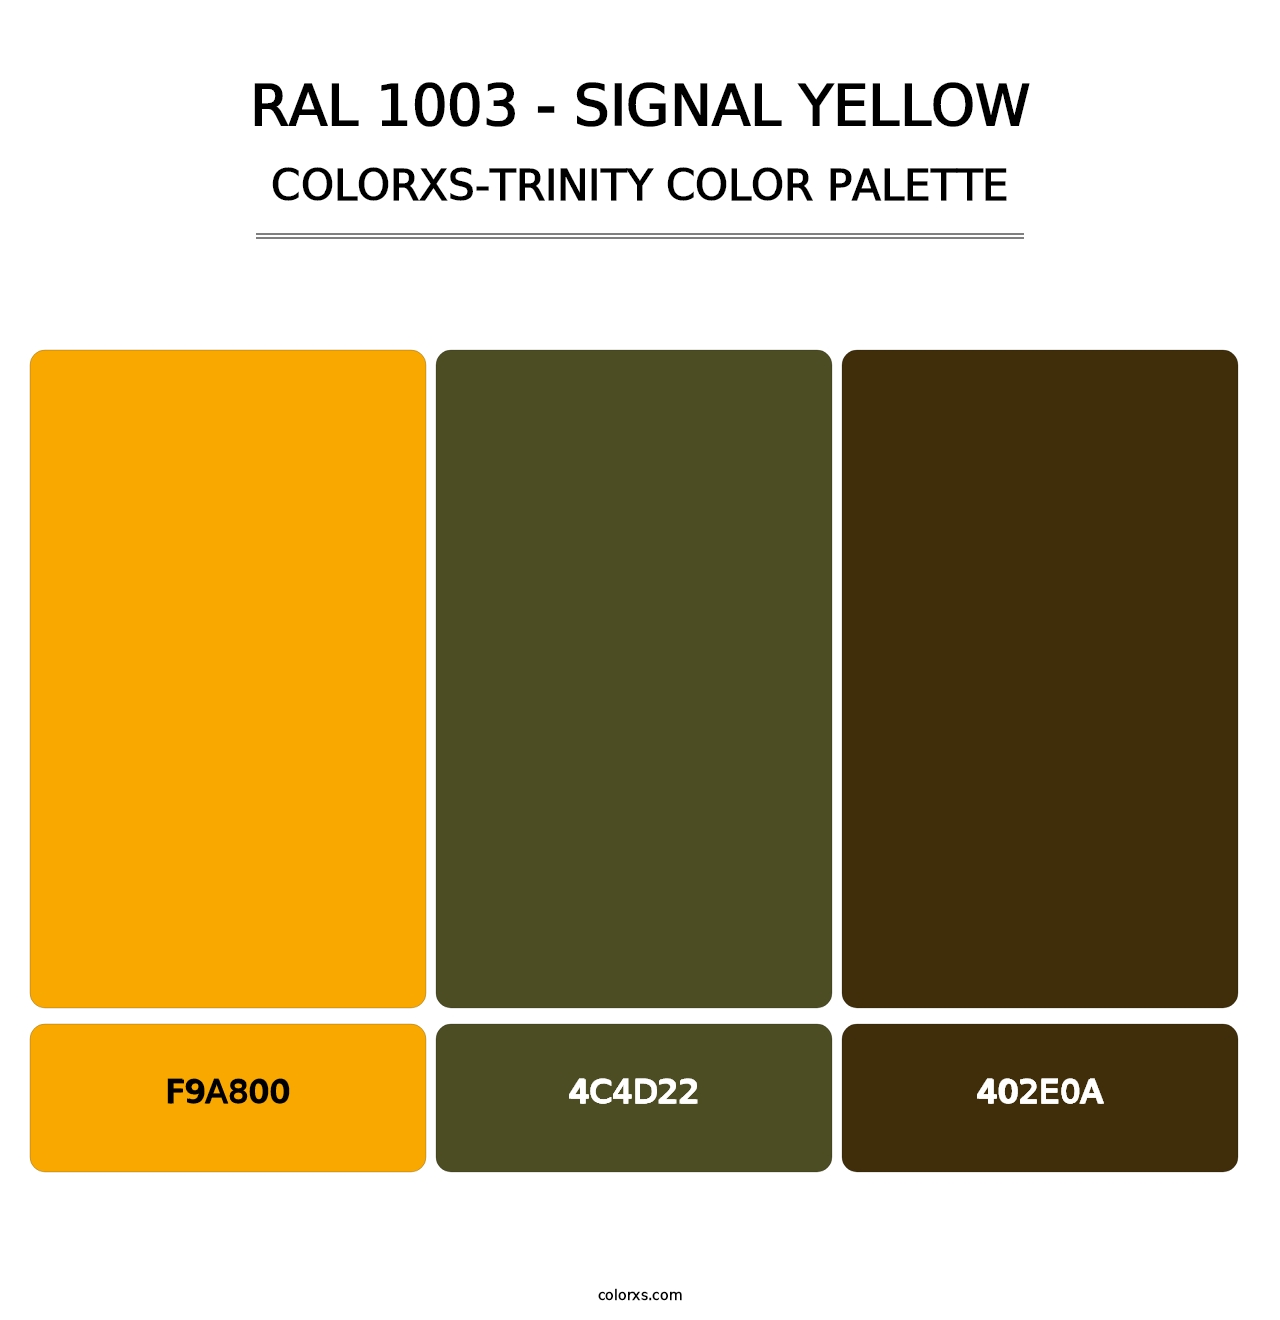 RAL 1003 - Signal Yellow - Colorxs Trinity Palette